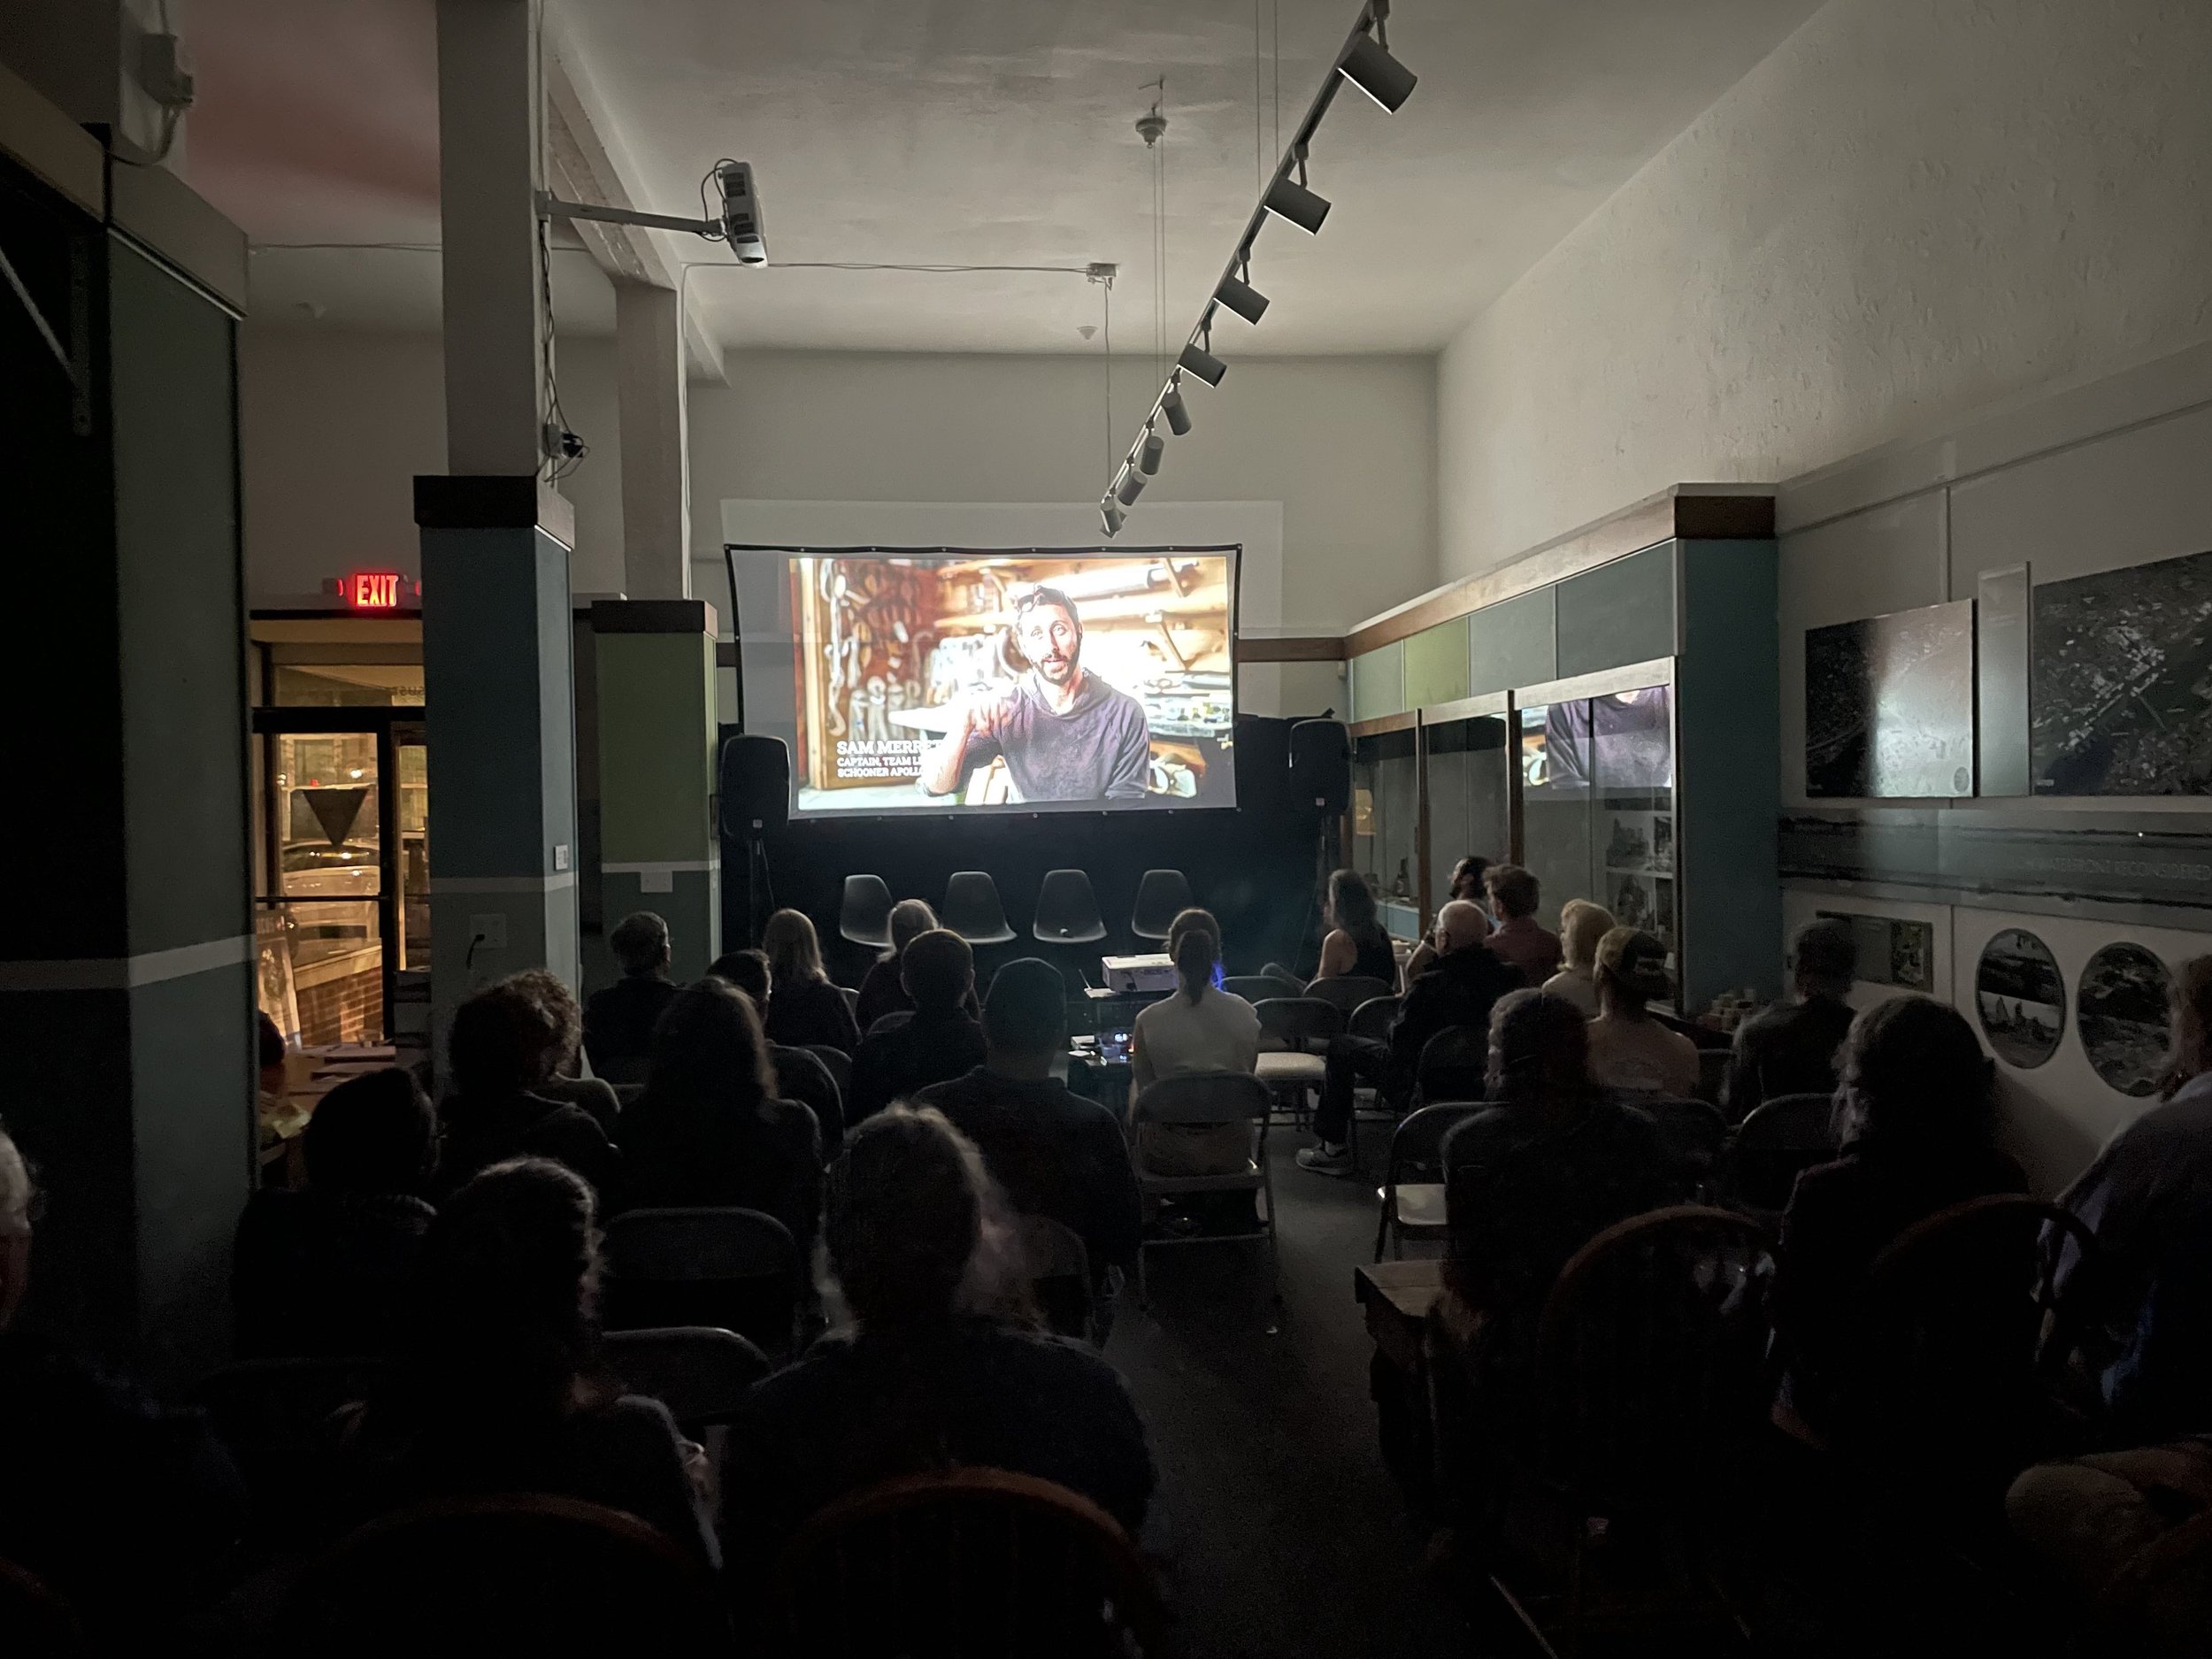   The Lab screened a number of films in the space including the documentary  Windshipped . Films are a great way to bring out the community!  